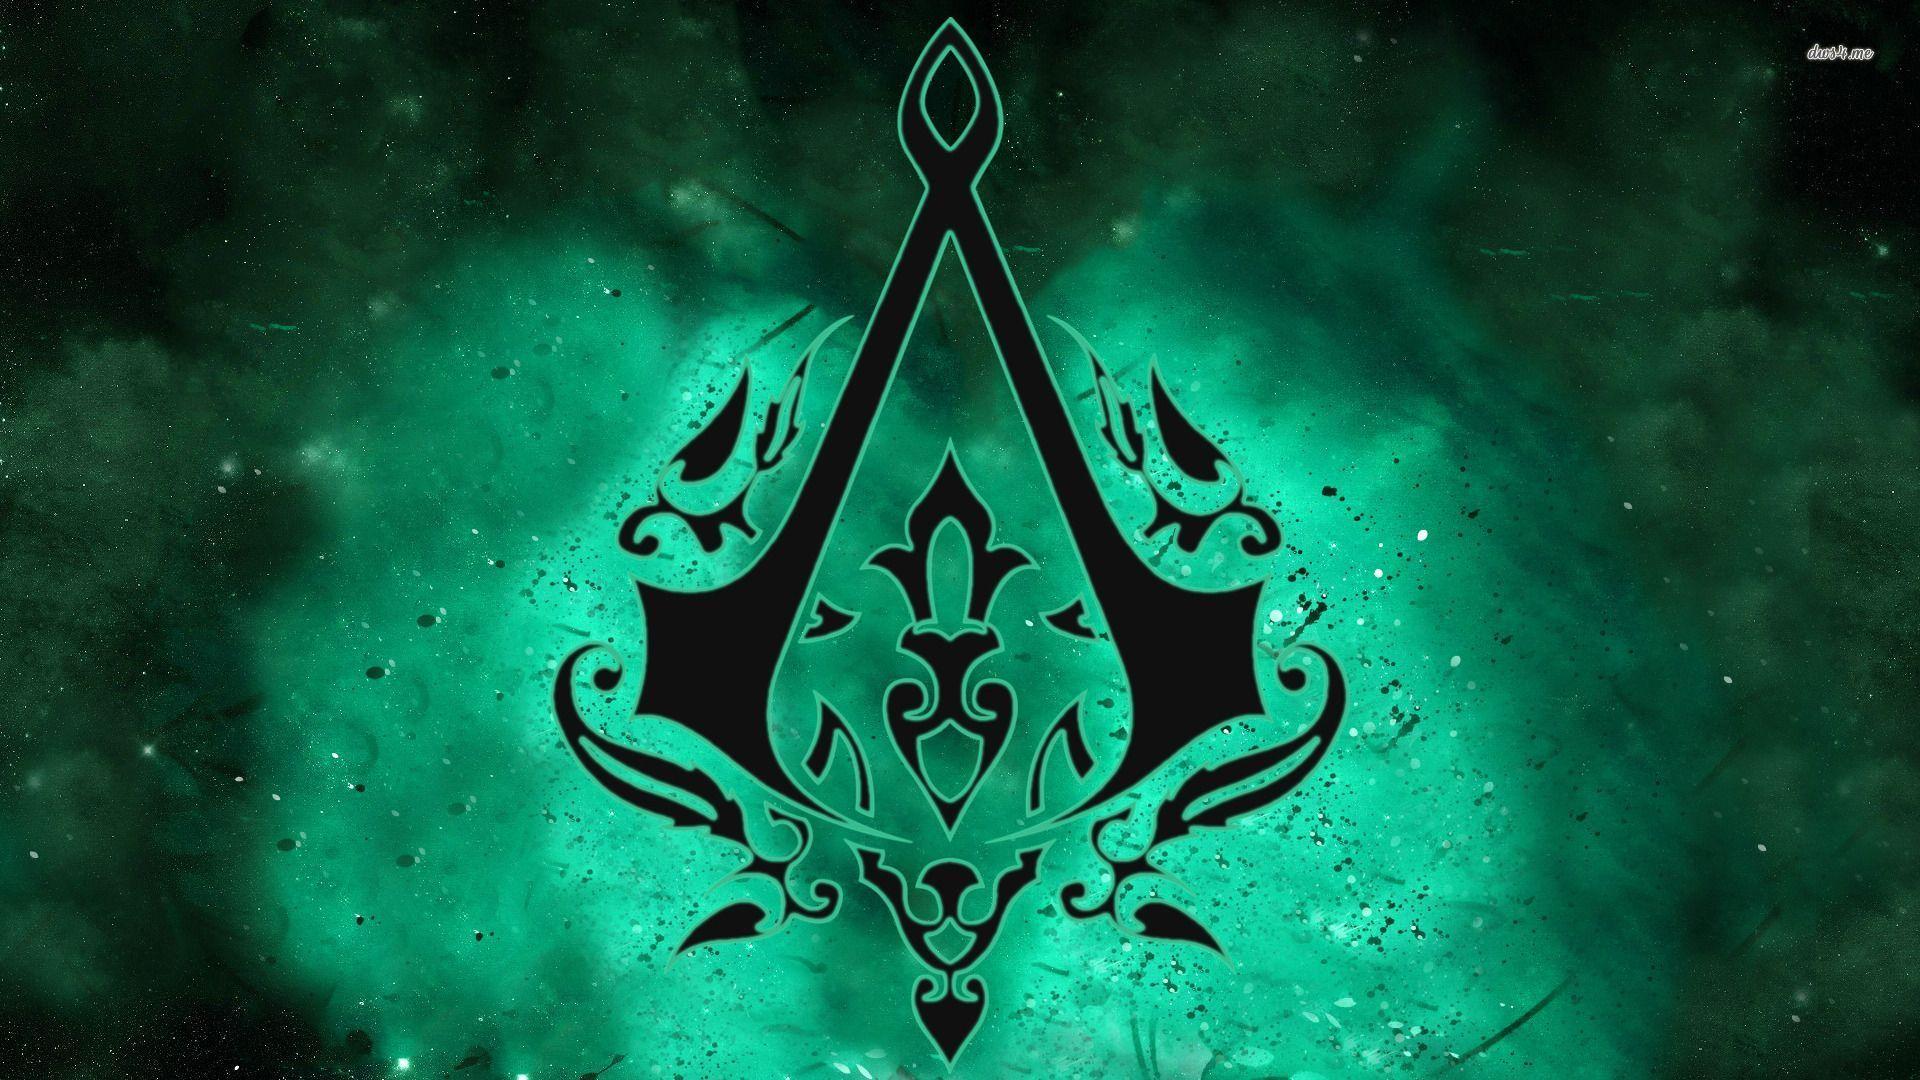 Wallpapers For > Assassins Creed Logo Wallpapers 1920x1080